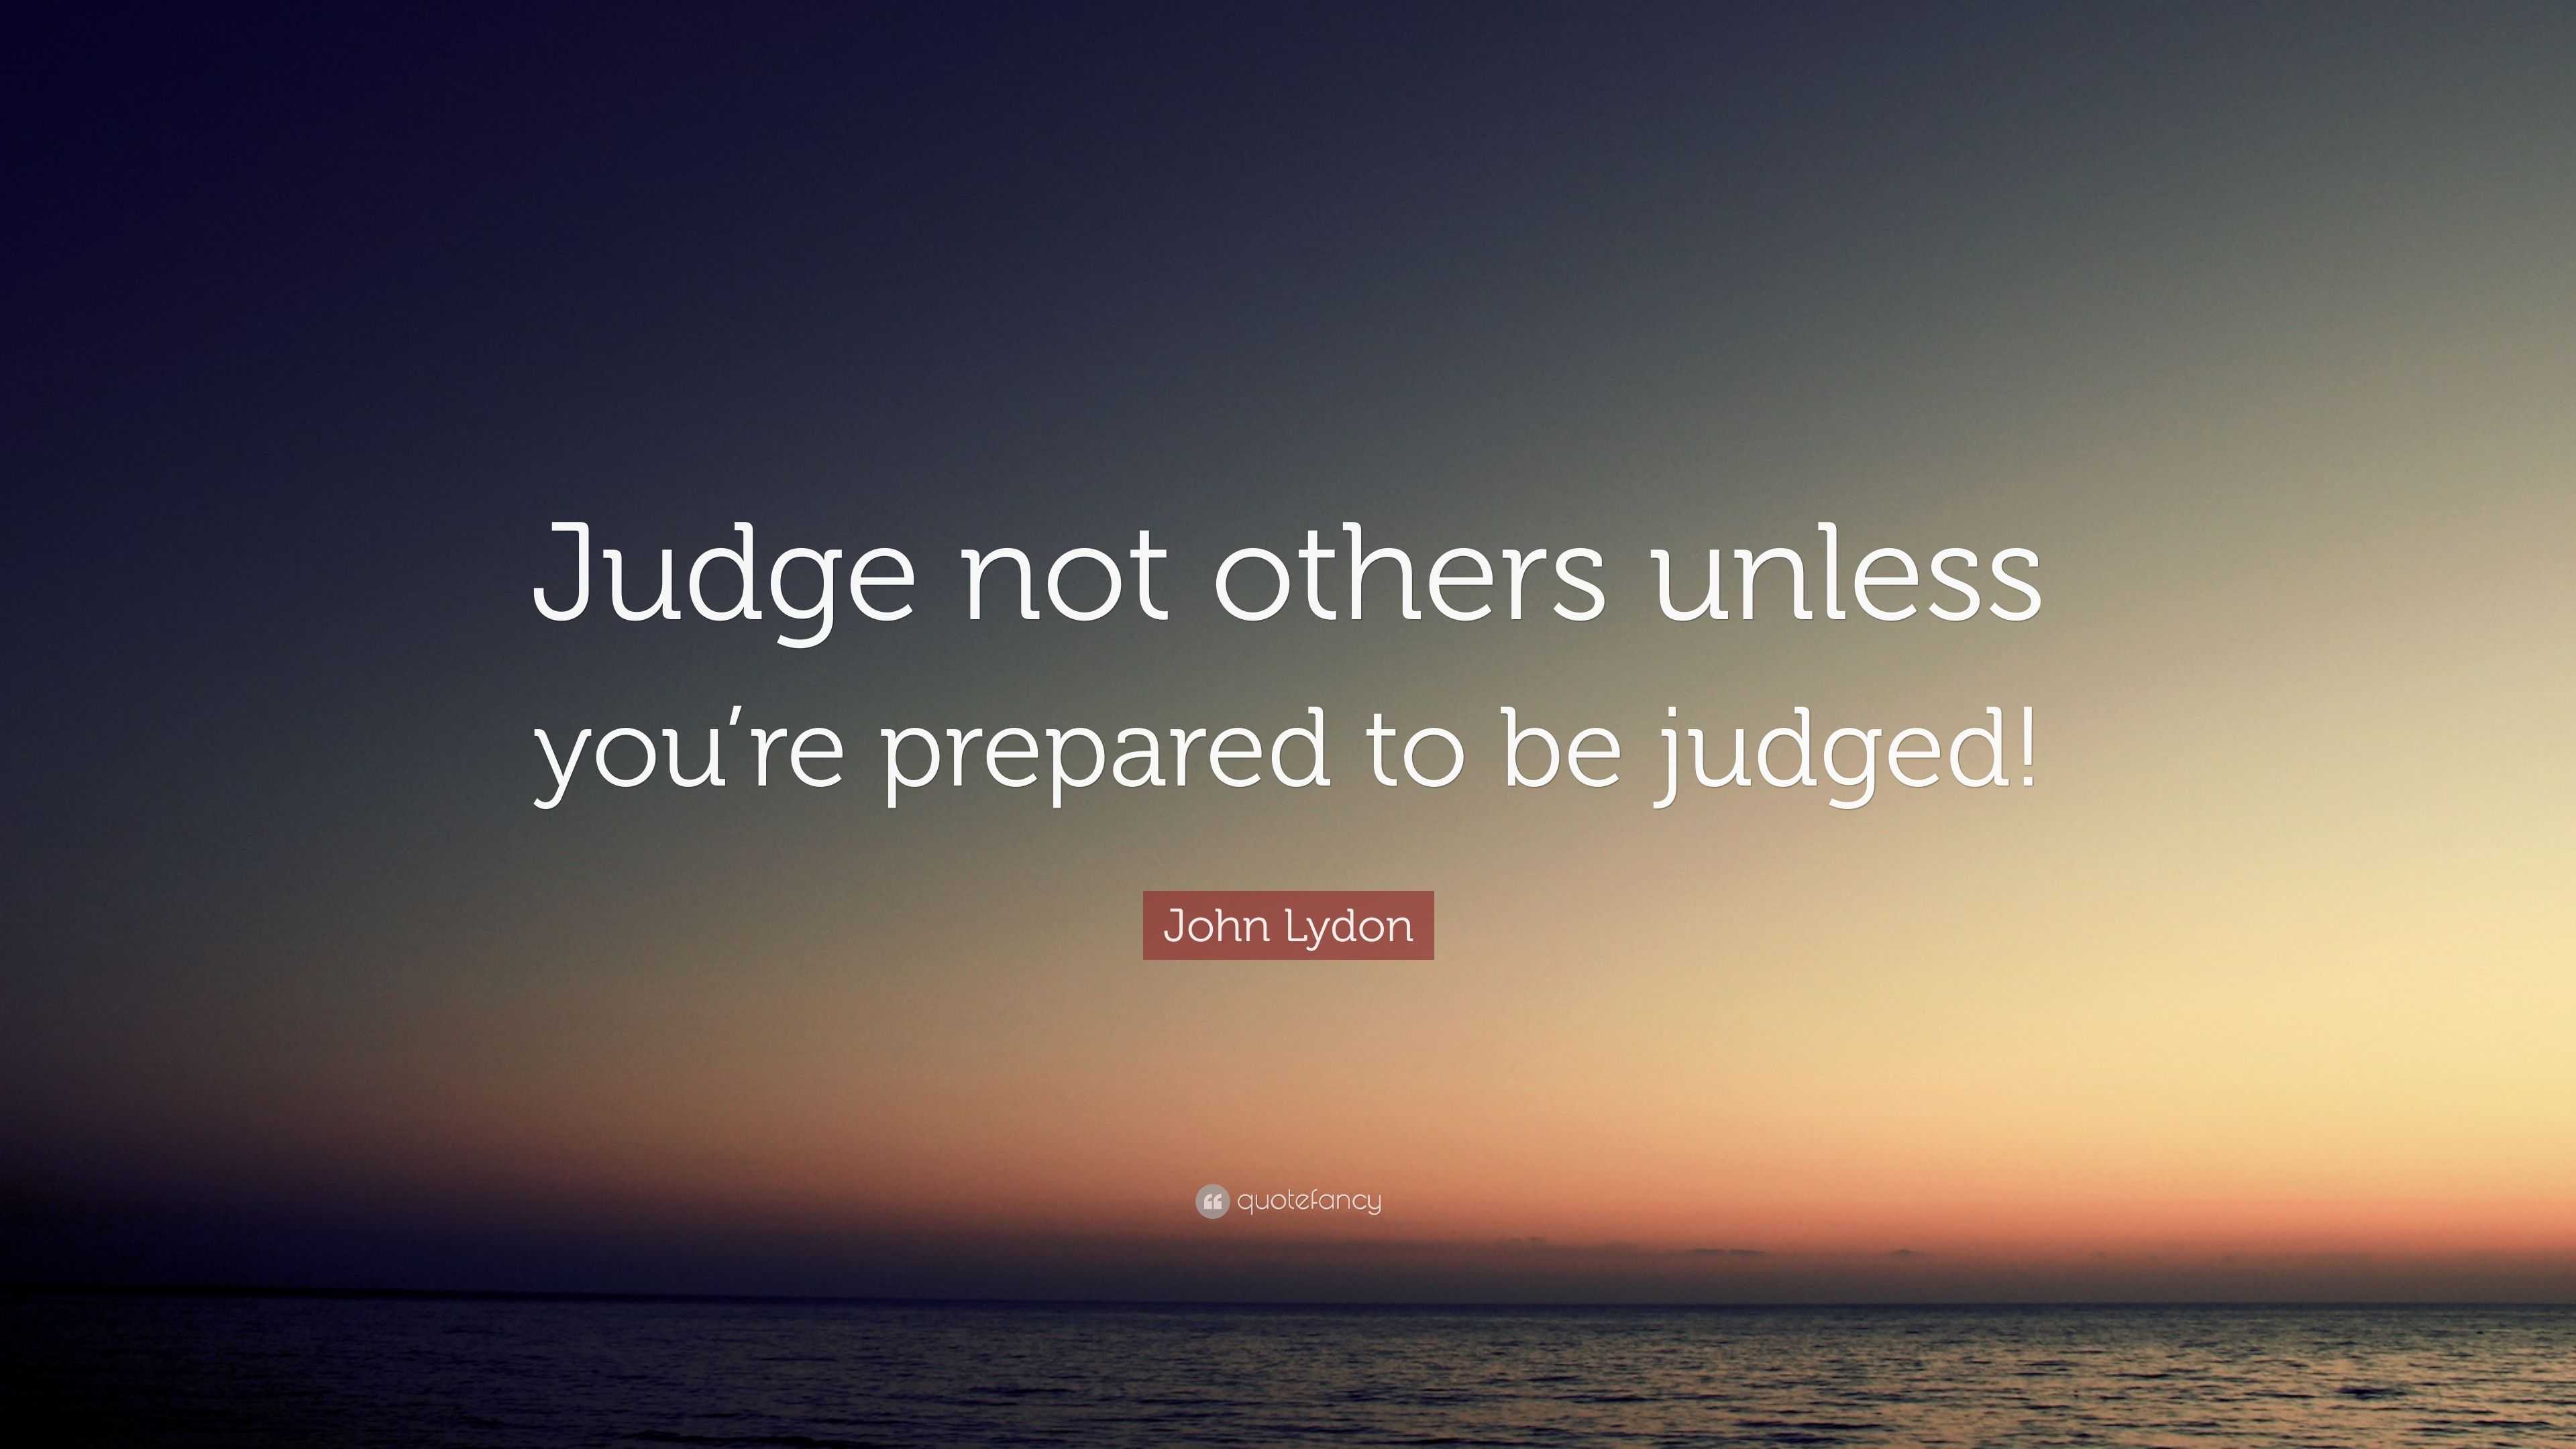 John Lydon Quote: “Judge not others unless you’re prepared to be judged!”